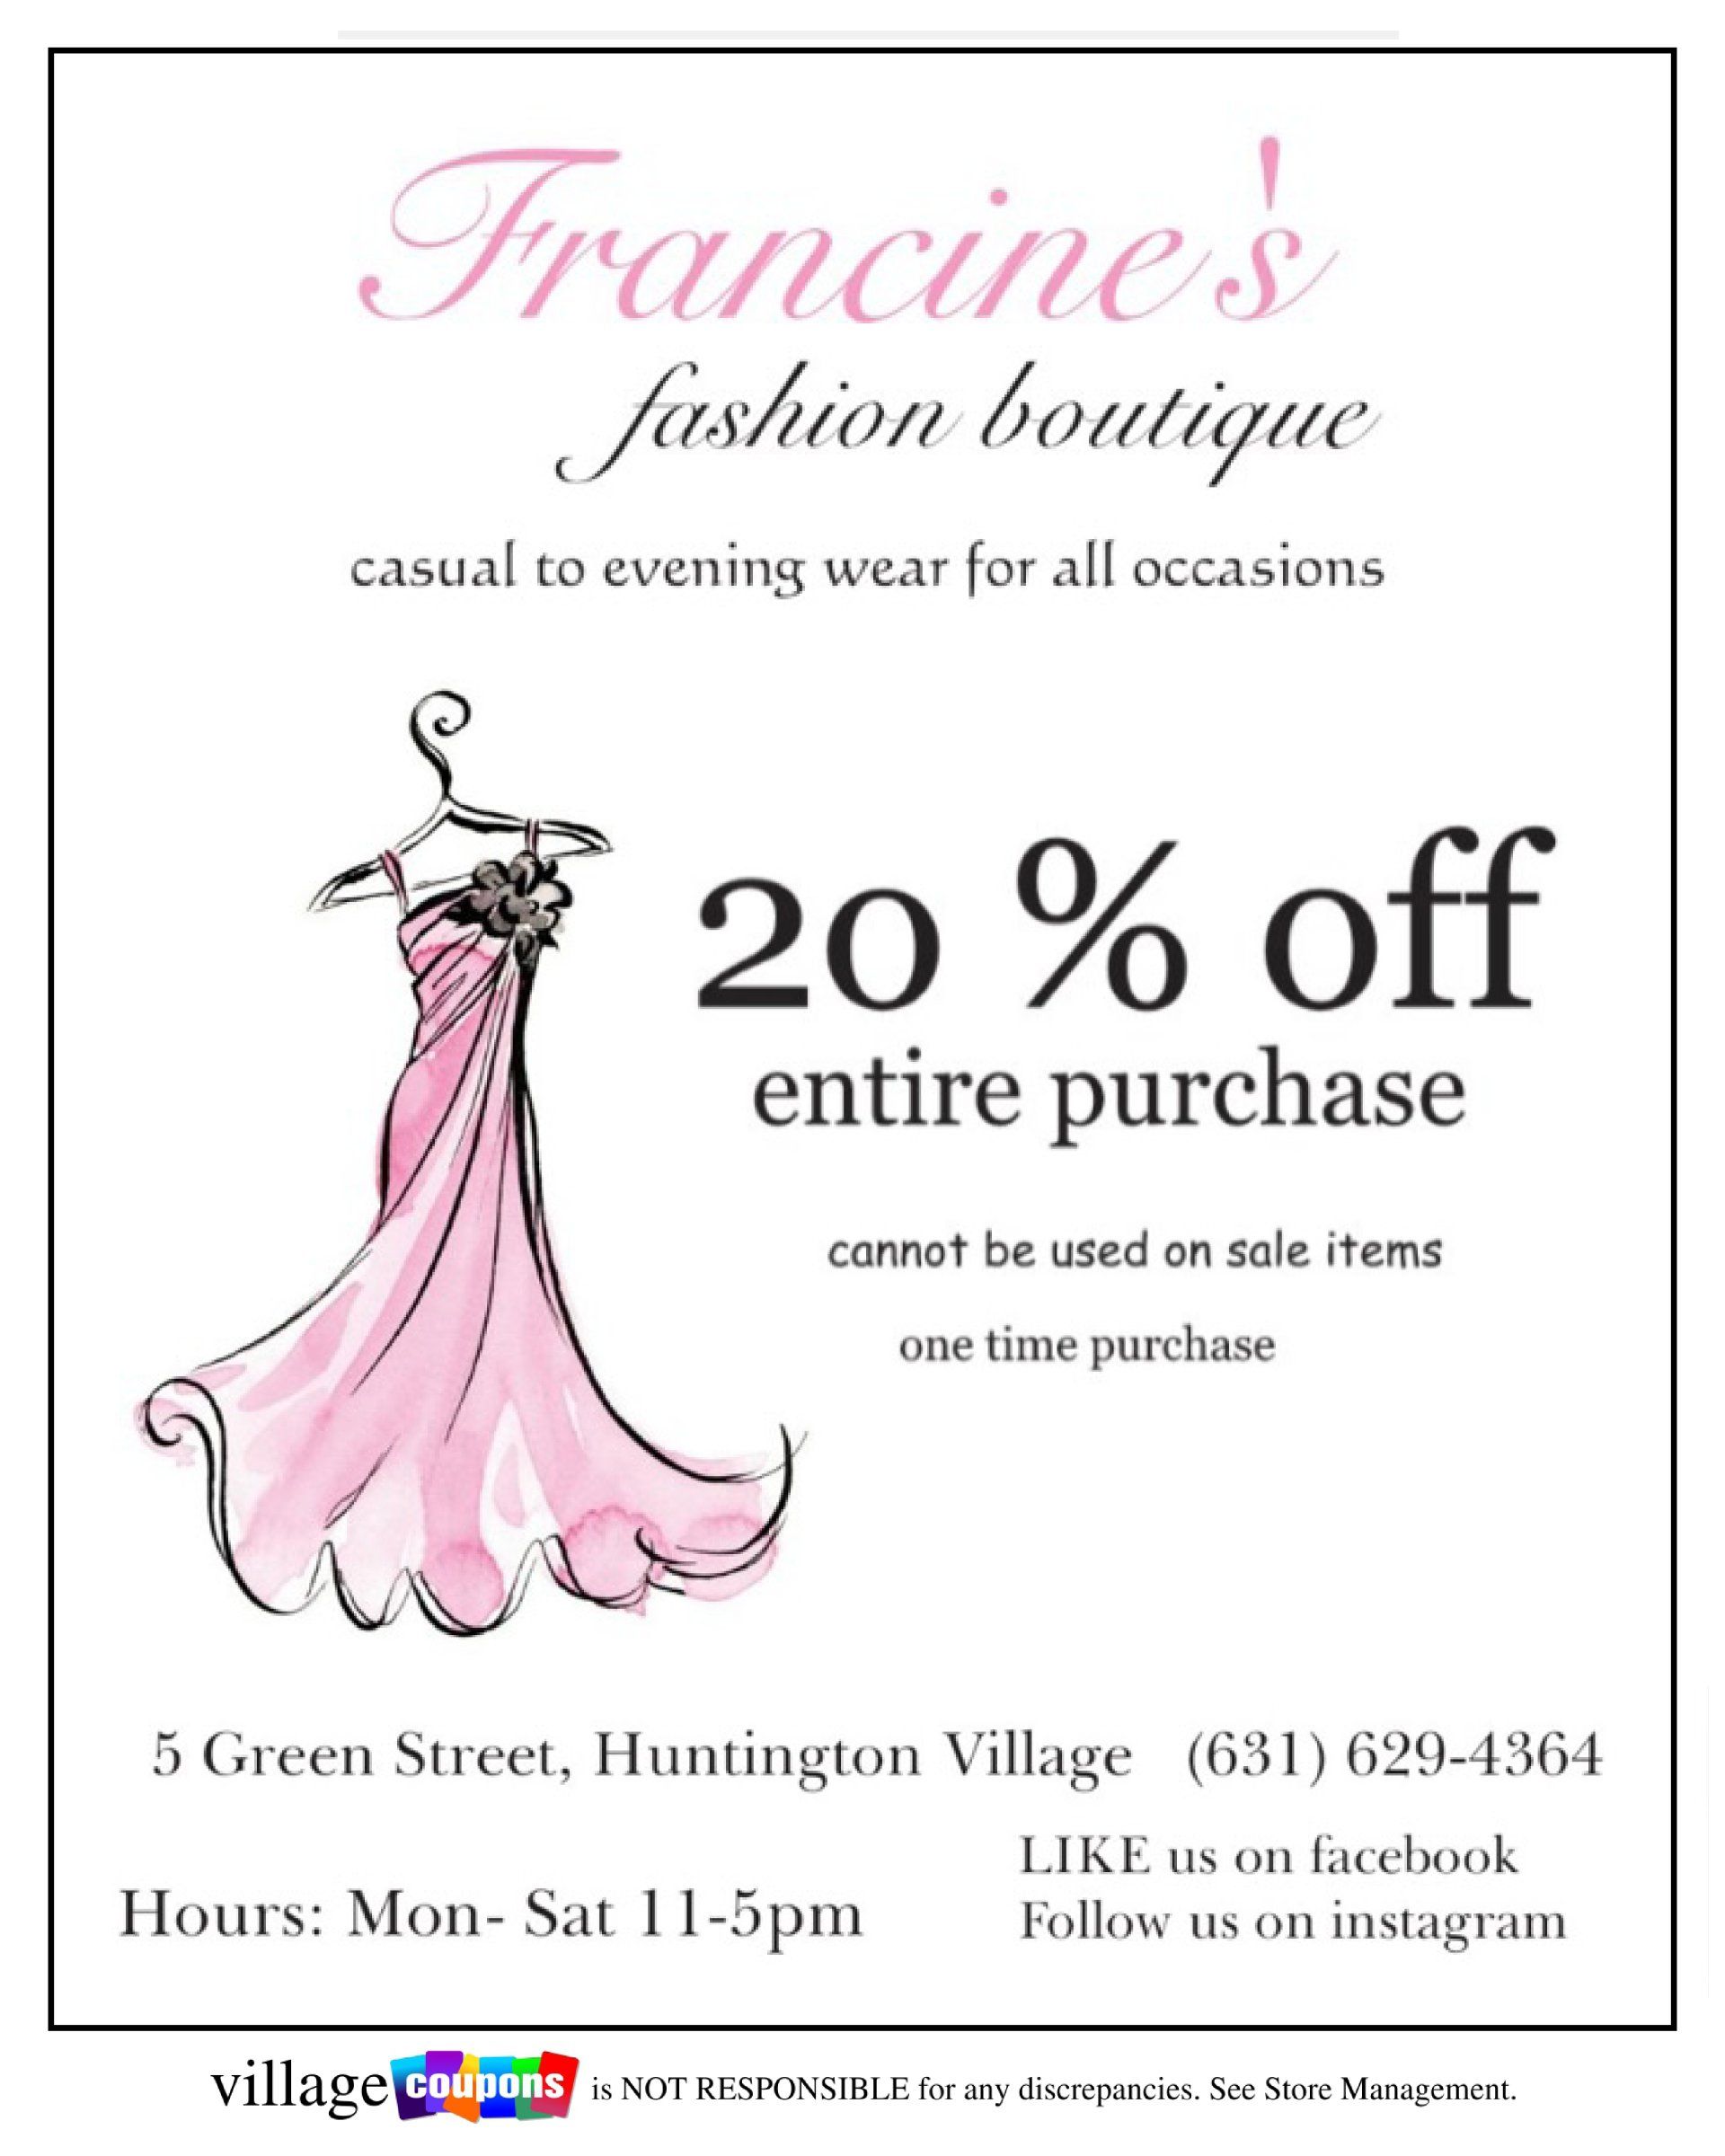 An advertisement for francine 's fashion boutique shows a pink dress on a hanger